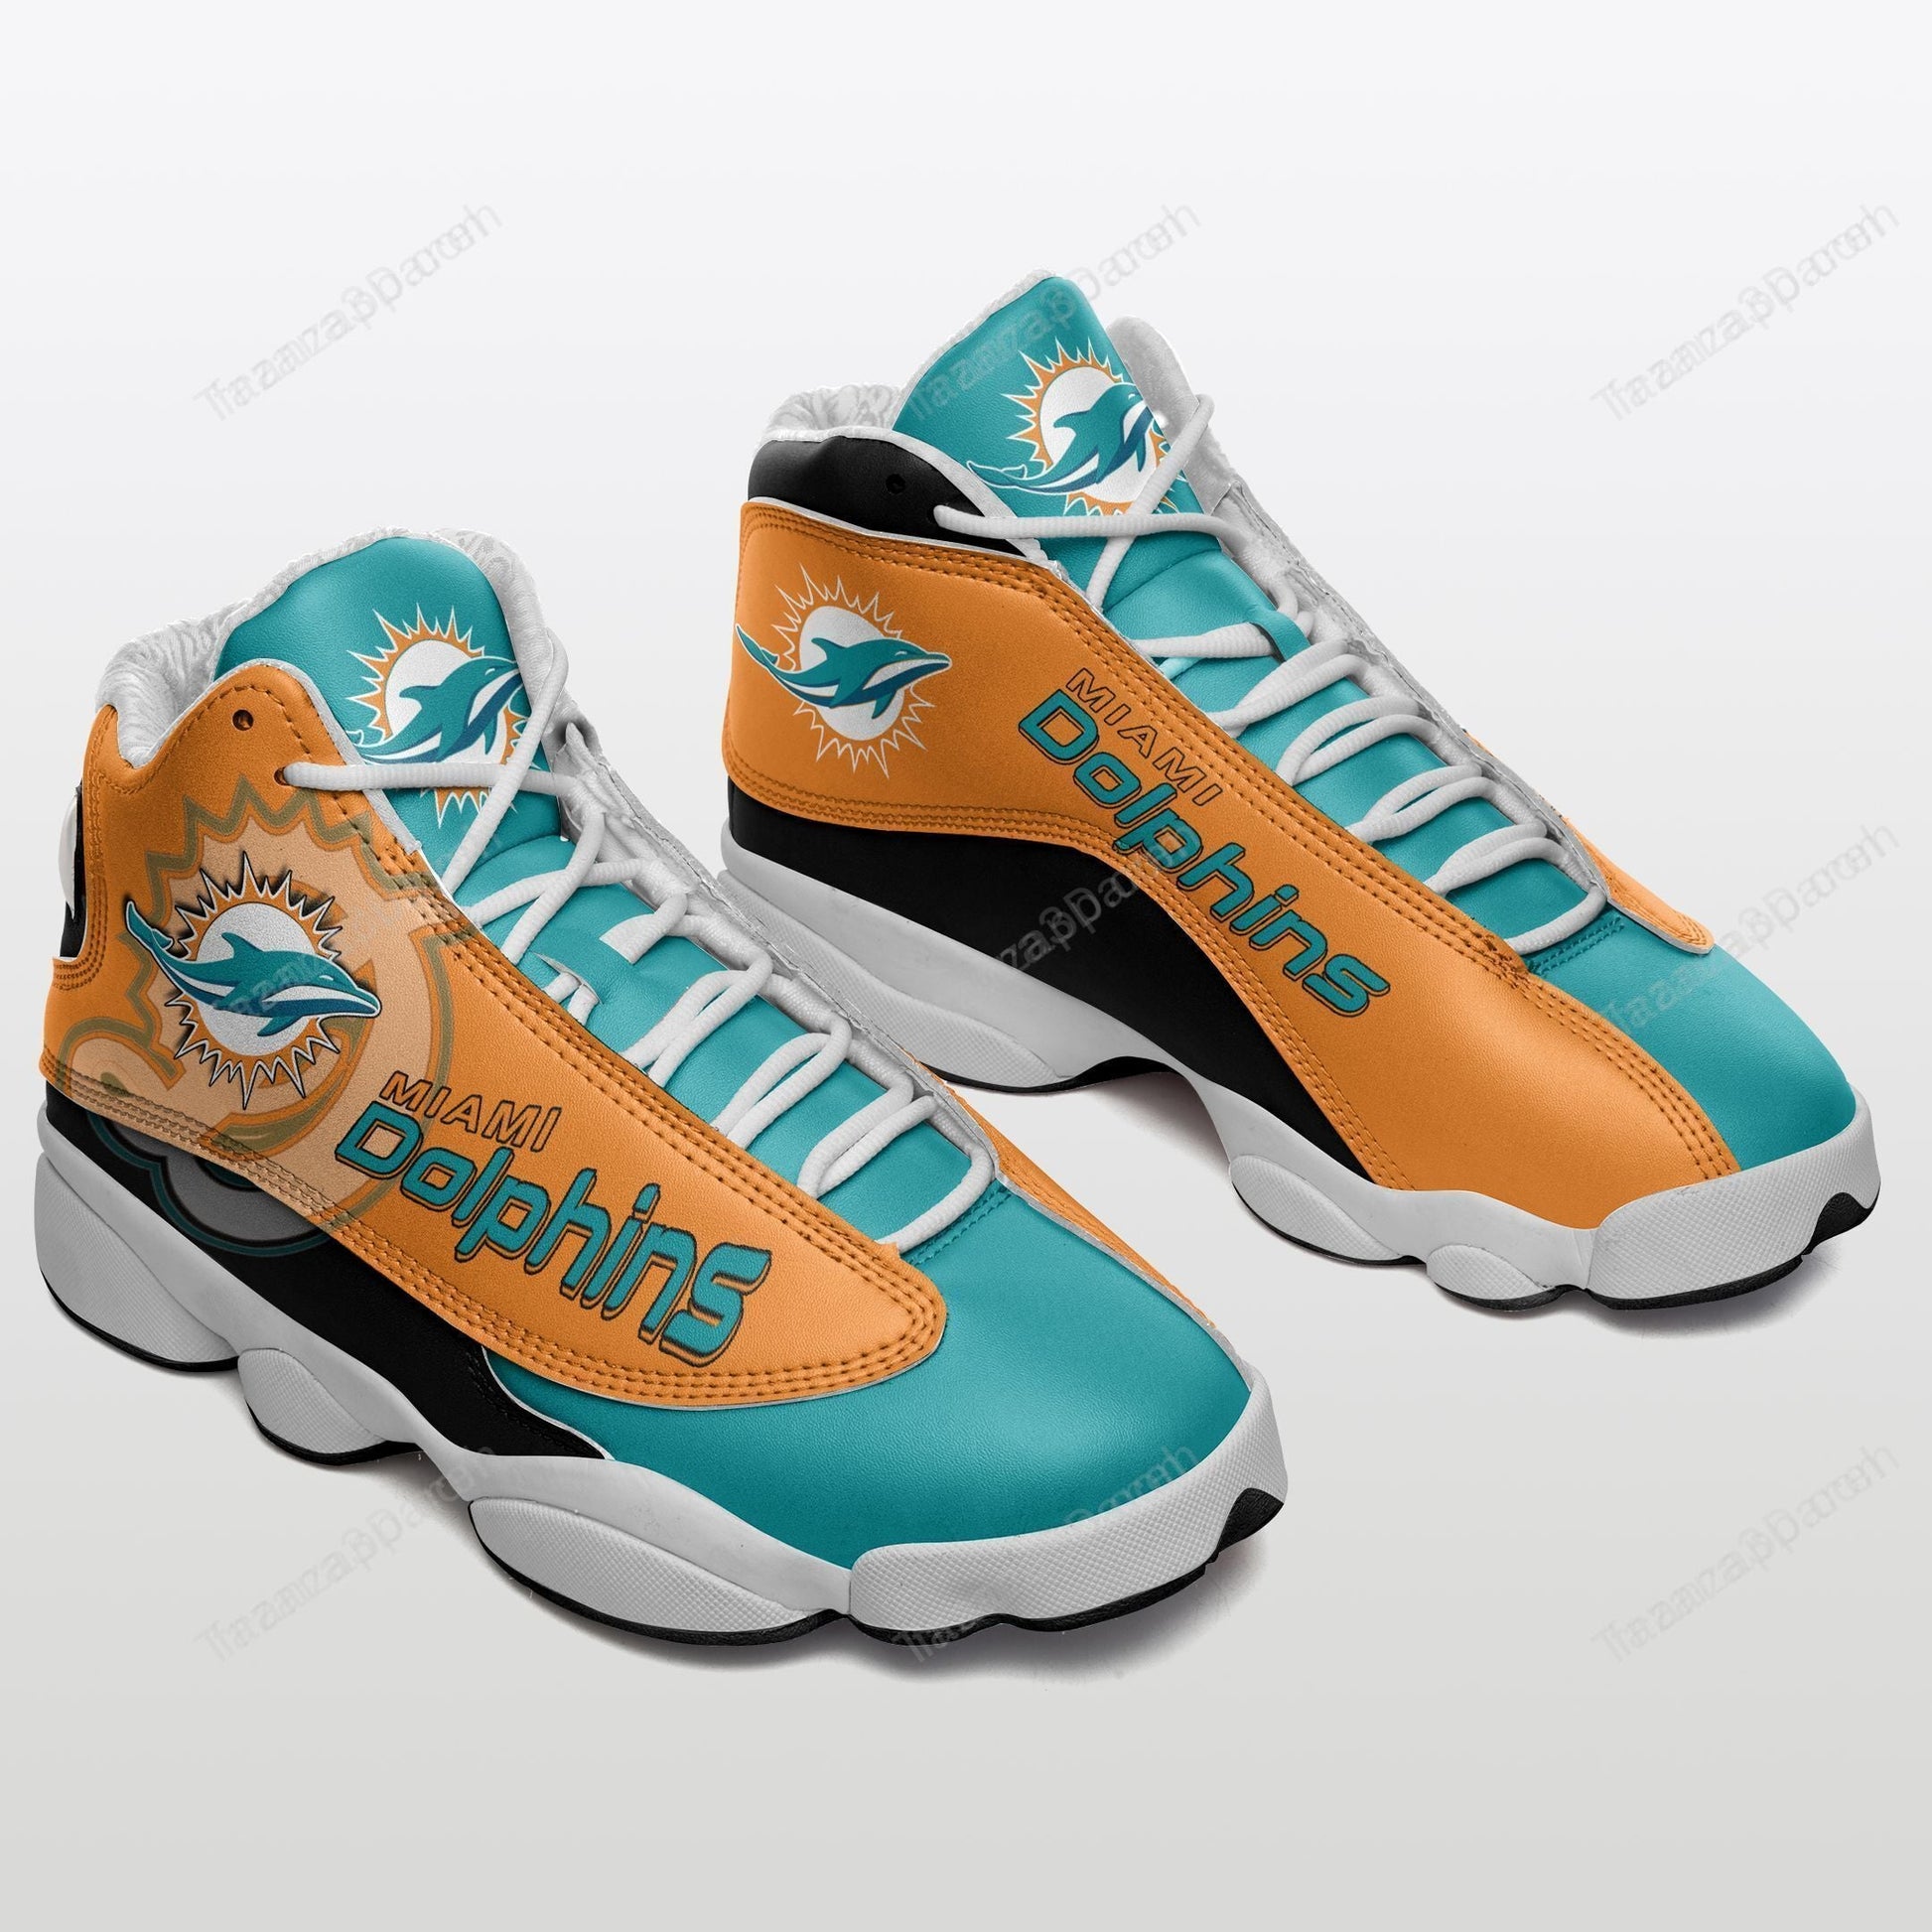 Miami Dolphins Custom Shoes Sneakers 364-Gear Wanta